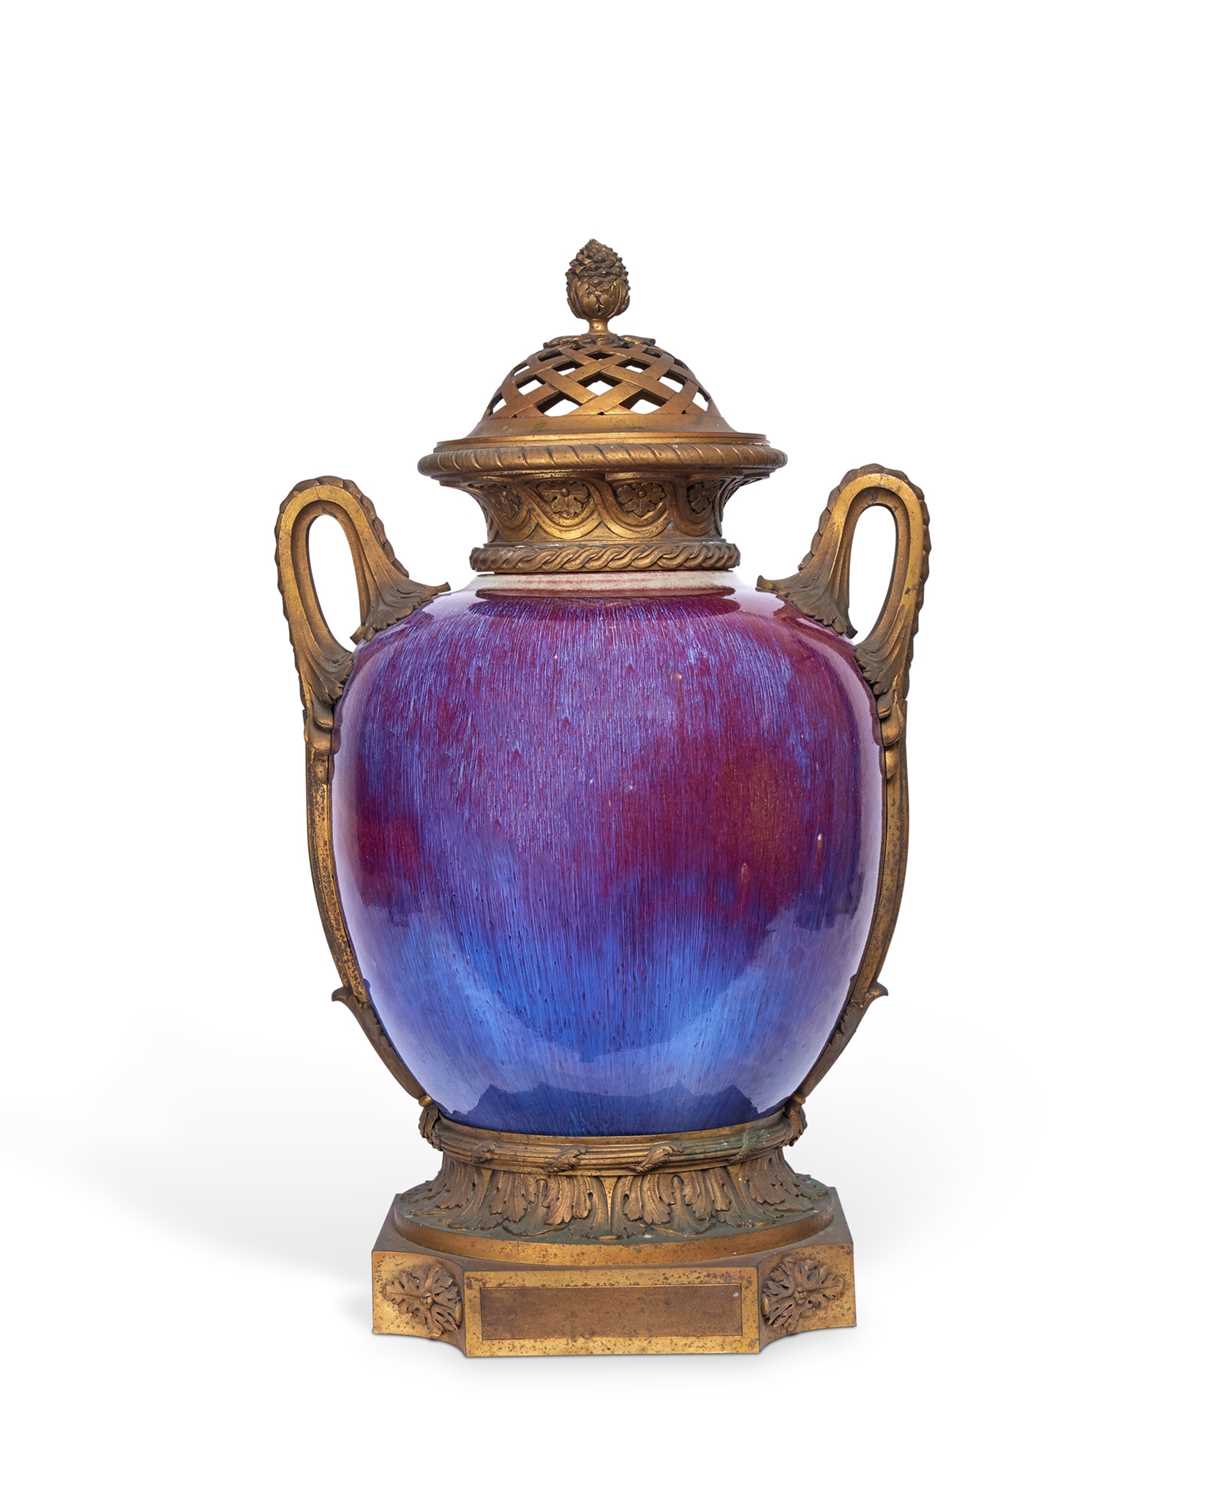 ESCALIER DE CRISTAL: A FINE 19TH CENTURY CHINESE FLAMBE VASE WITH ORMOLU MOUNTS - Image 4 of 16